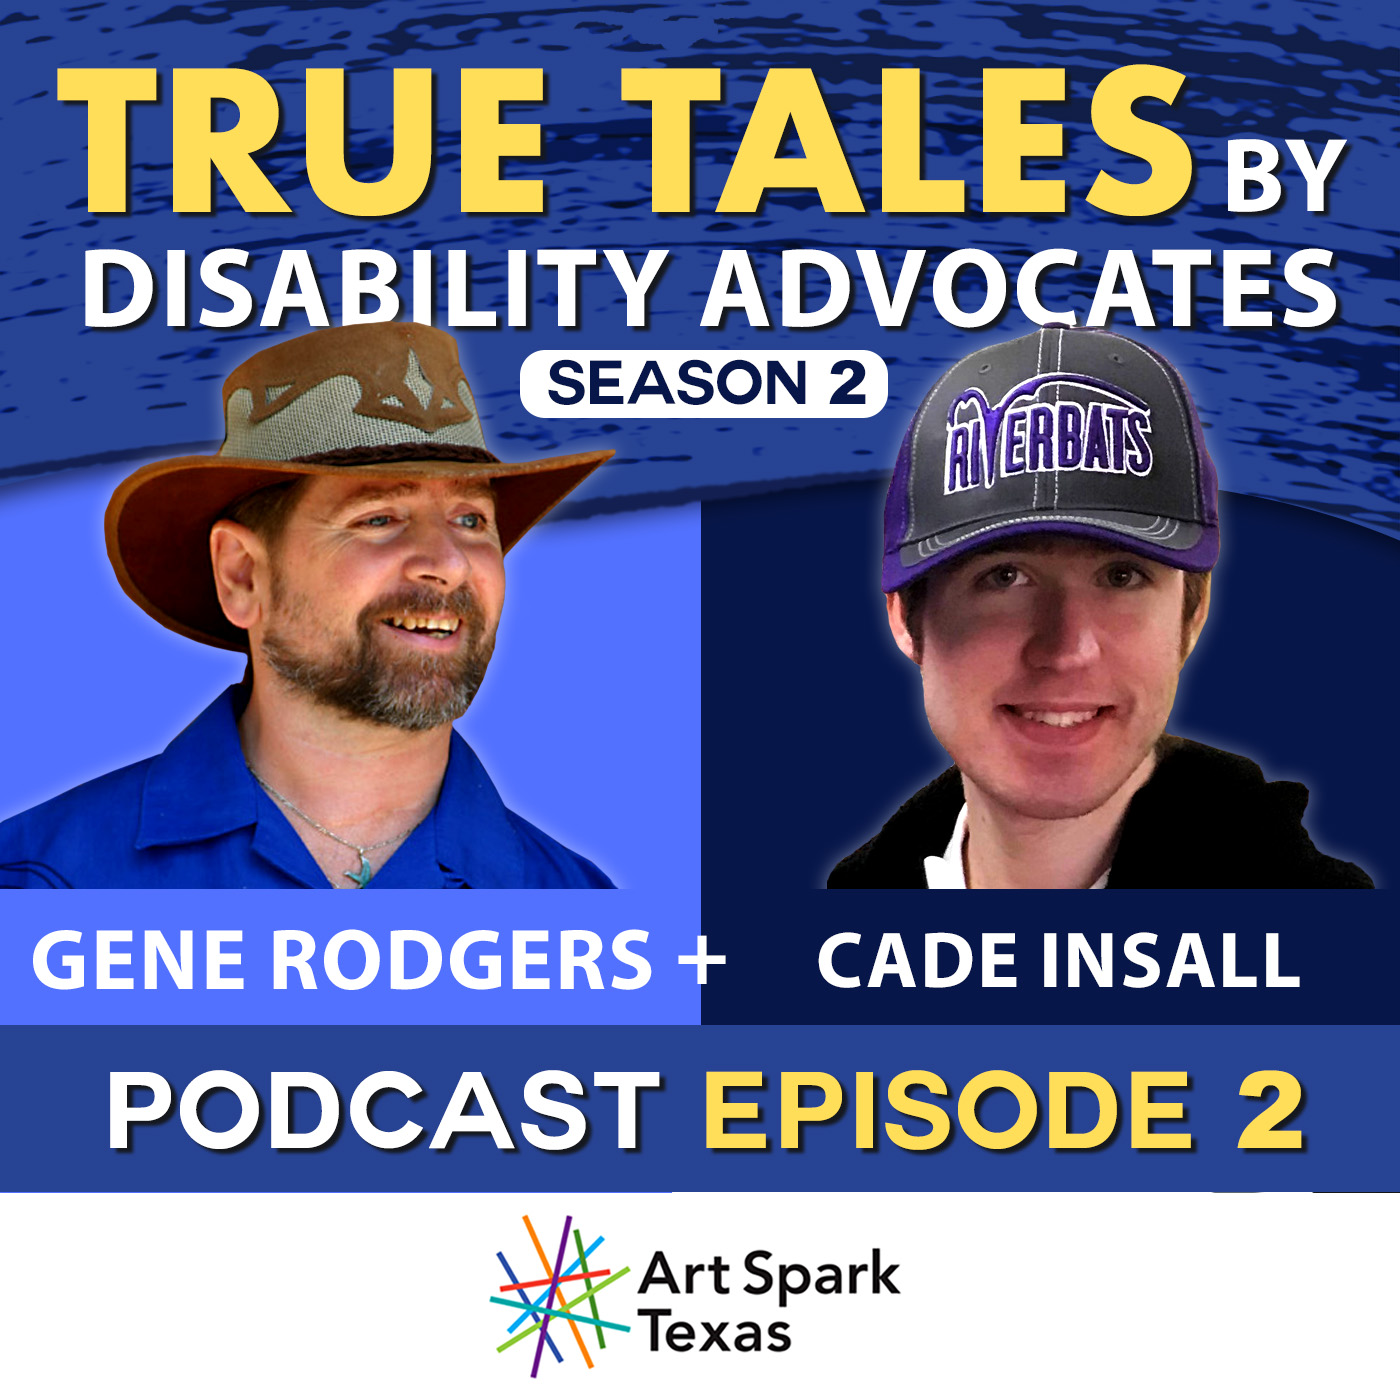 True tales by disability advocaates episode two graphic featuring pictures of the hosts Gene Rodgers and Cade Insall.